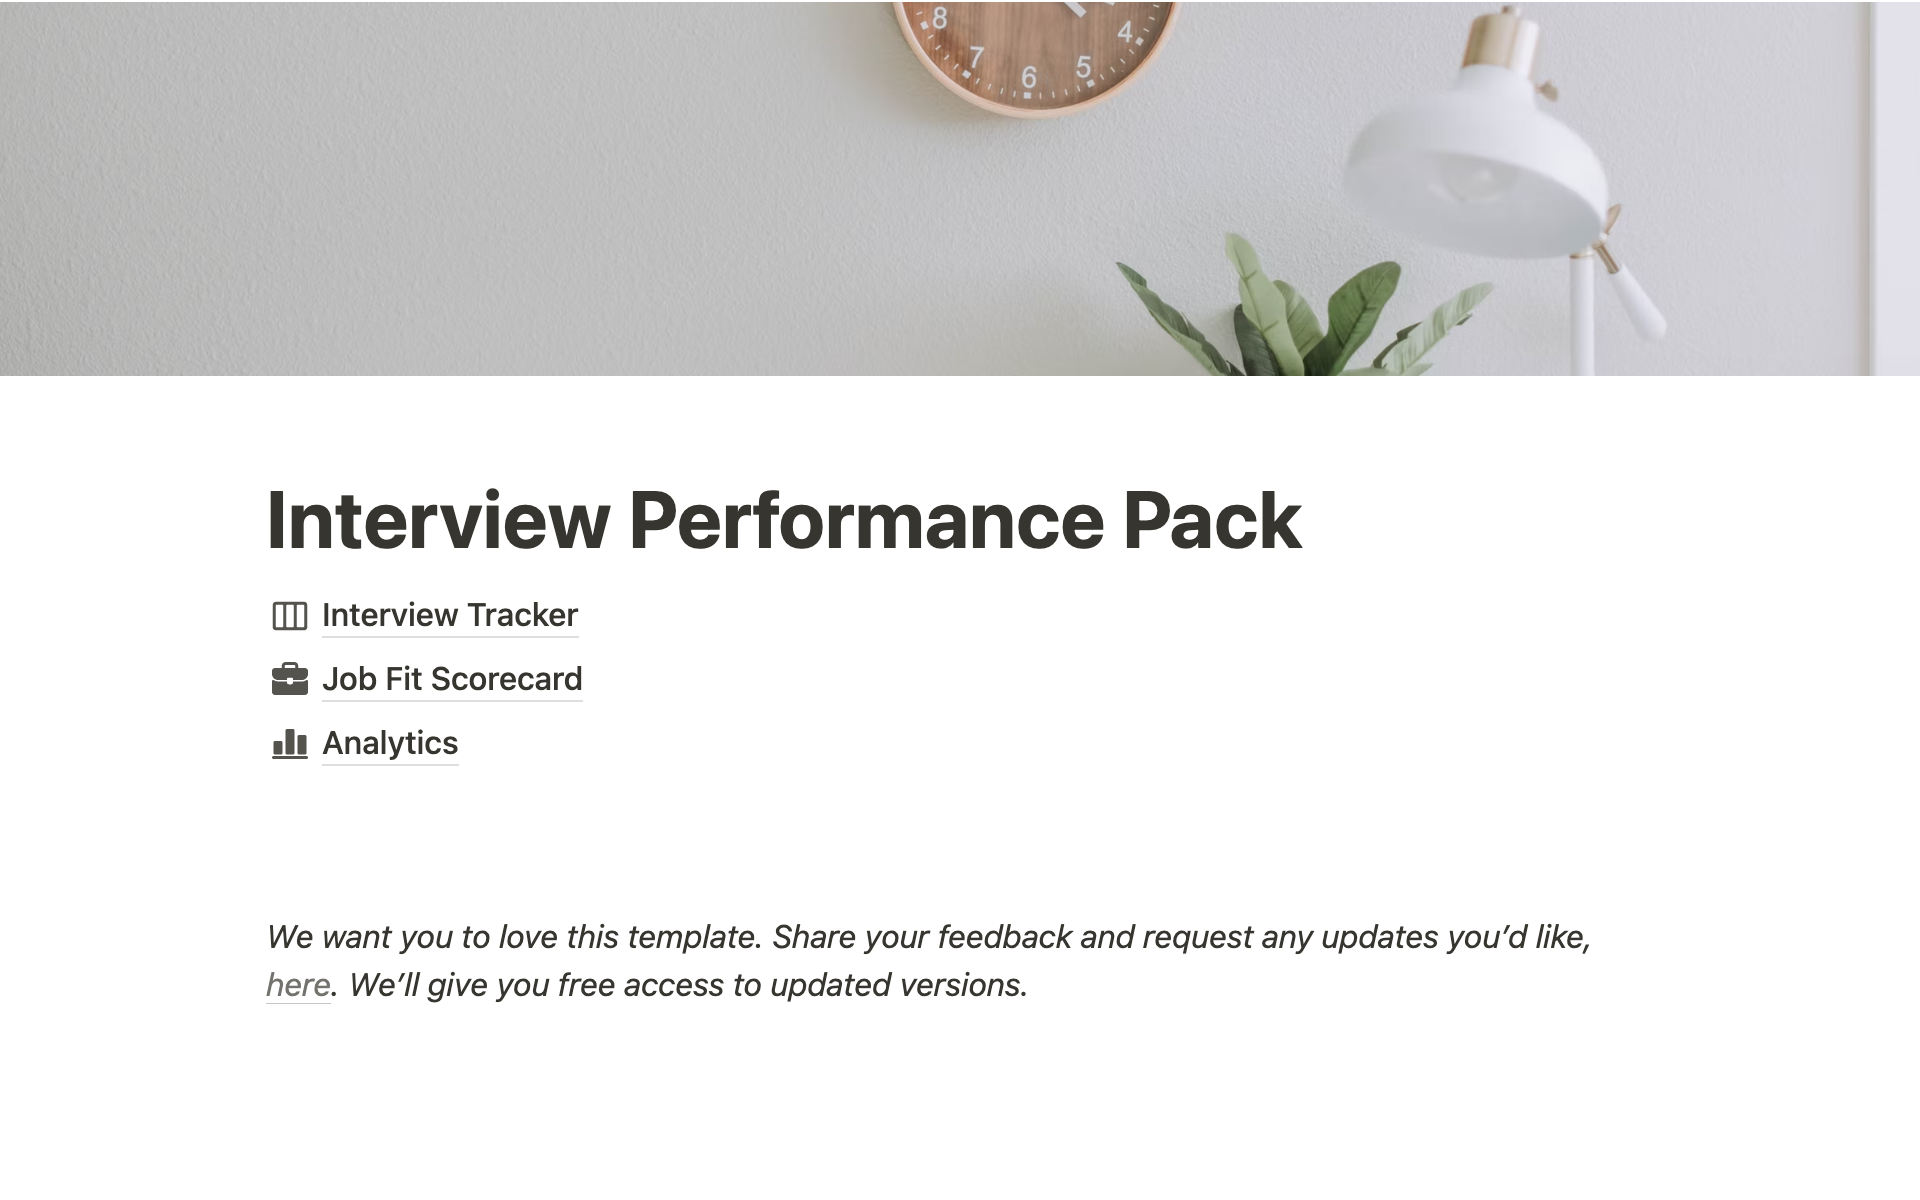 It's an interview system that uses analytics and mindful prioritization to help job seekers land their ideal role.